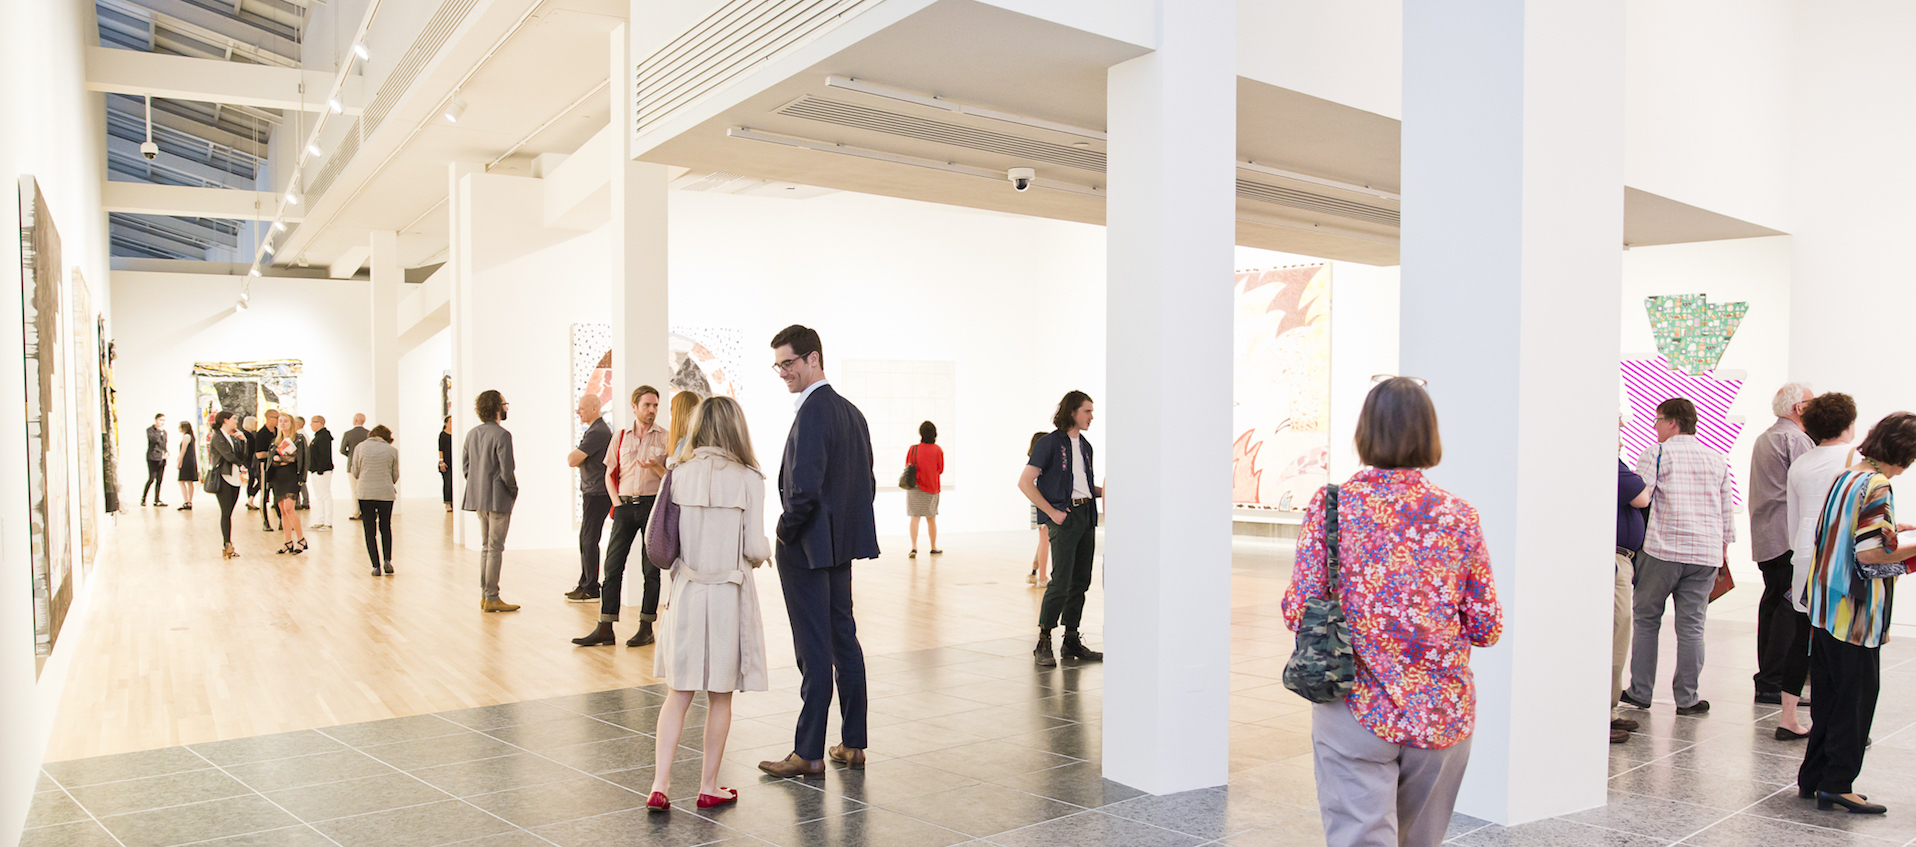 Image of gallery visitors during the May 18, 2018 preview reception for the Wexner Center for the Arts exhibition "Inherent Structure." Photo: Katie Spengler